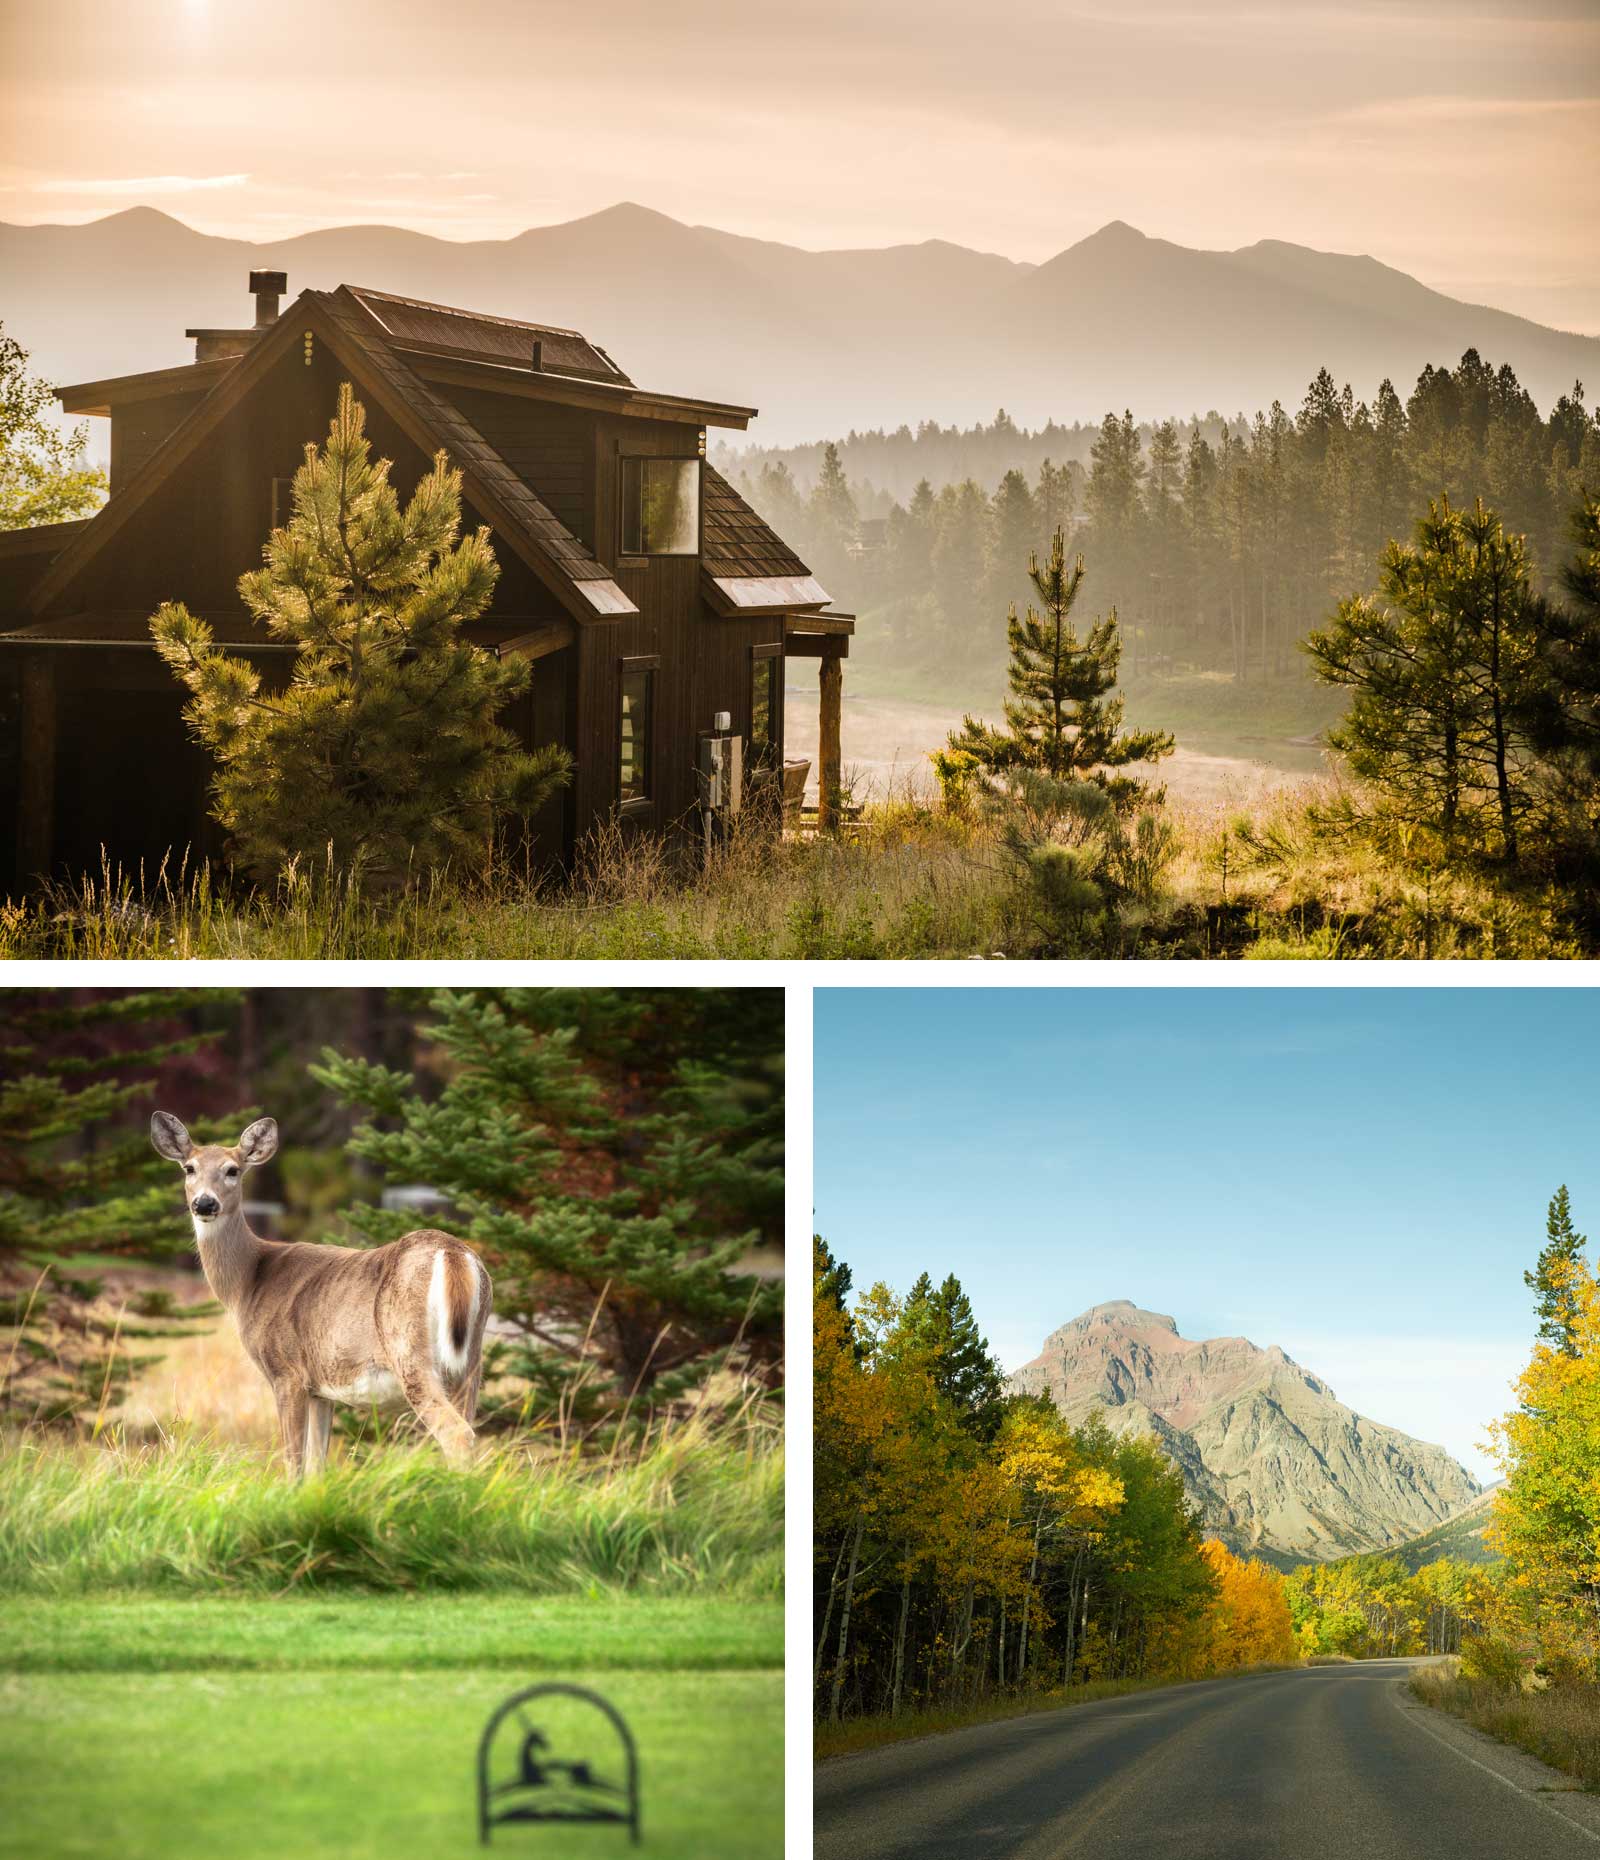 olf and Glory: Great Outdoor Luxury Adventure in Montana